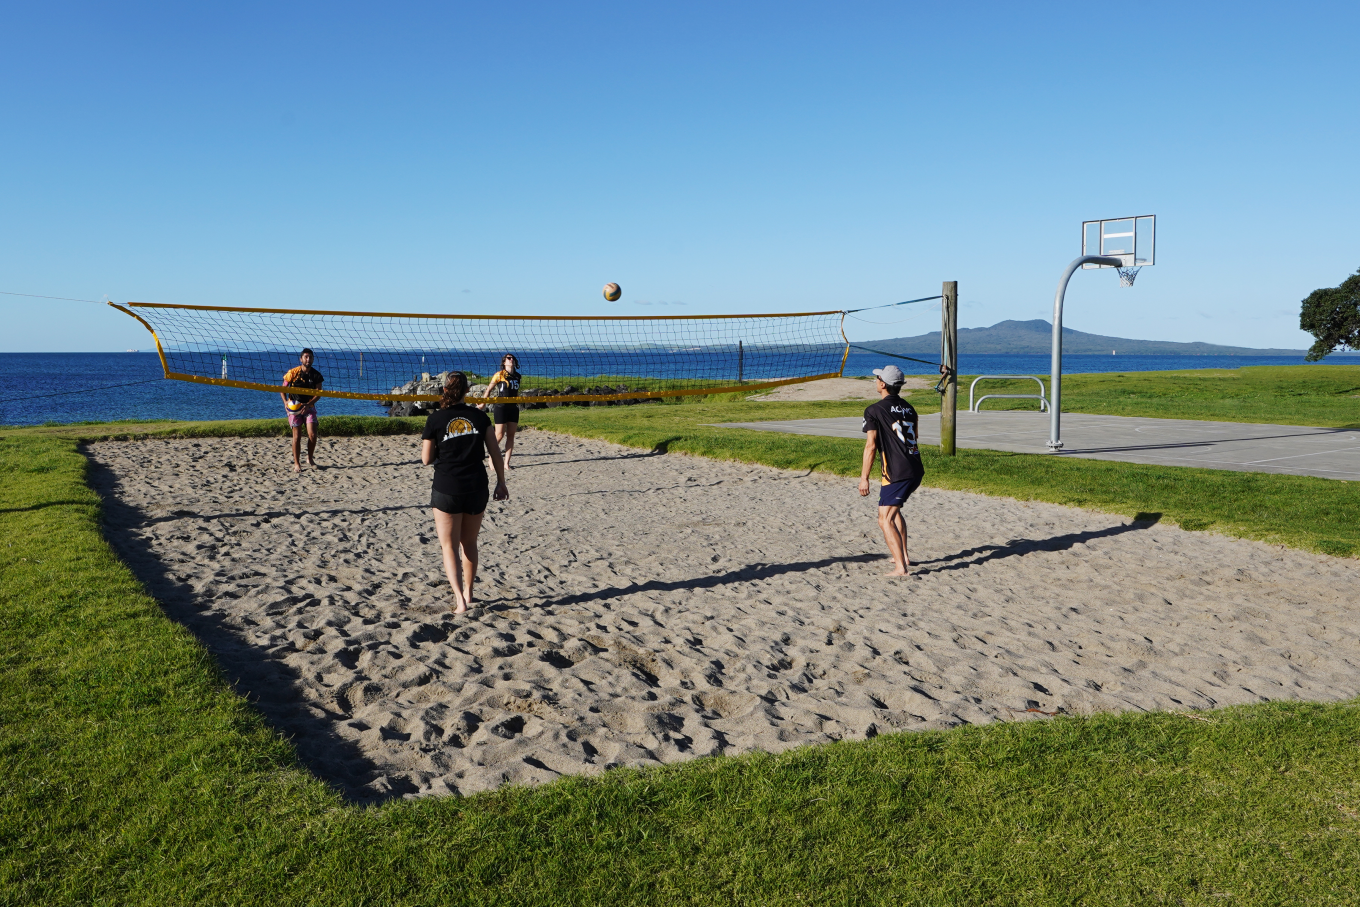 If group sports motivate you, take advantage of one of the outdoor courts across the region such as the volleyball court at Milford Reserve.